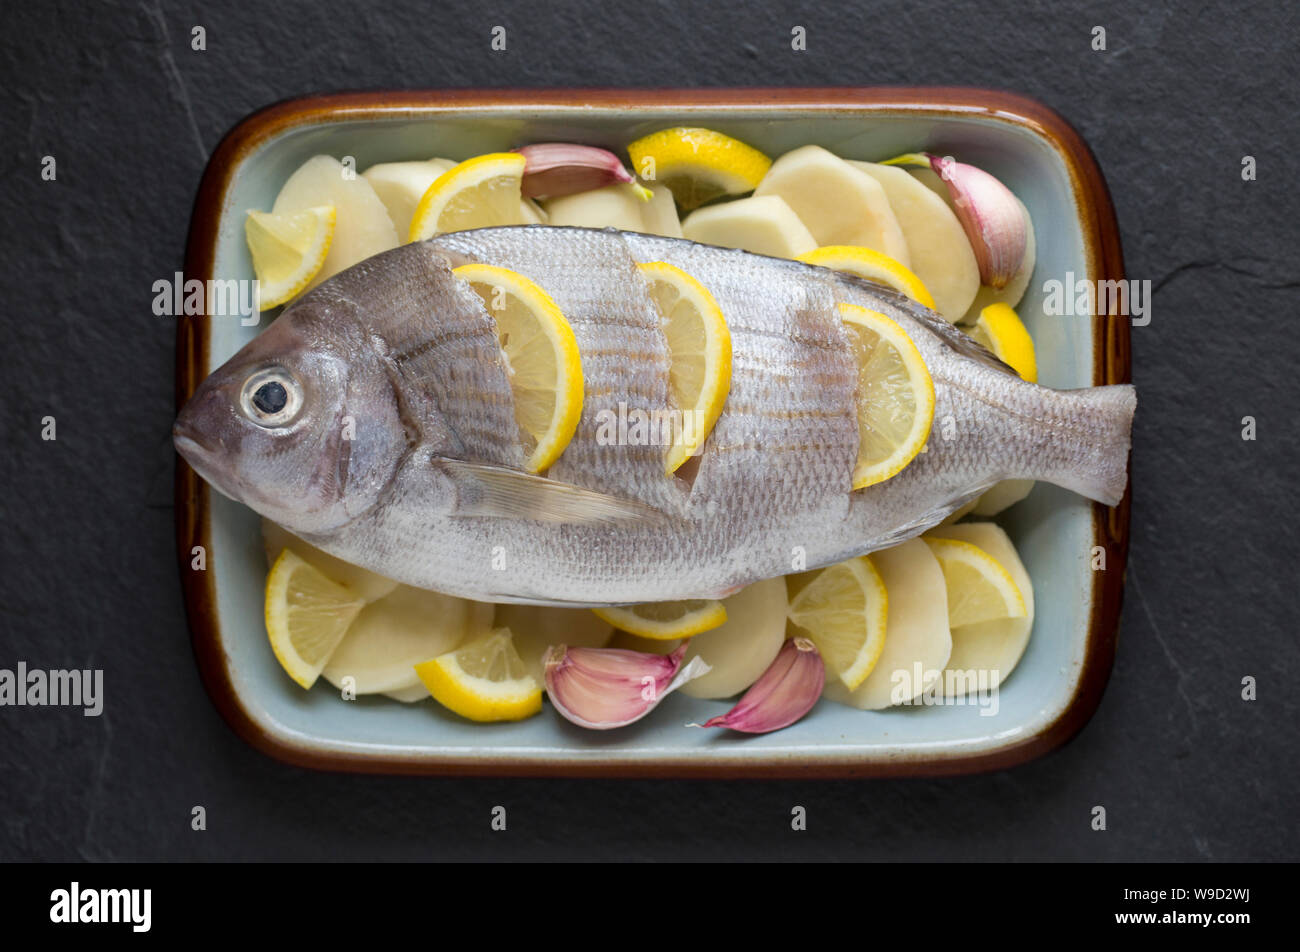 A raw, uncooked Black Bream, Spondyliosoma cantharus, that has been prepared to be cooked in a halogen oven. It has been placed on a bed of sliced pot Stock Photo